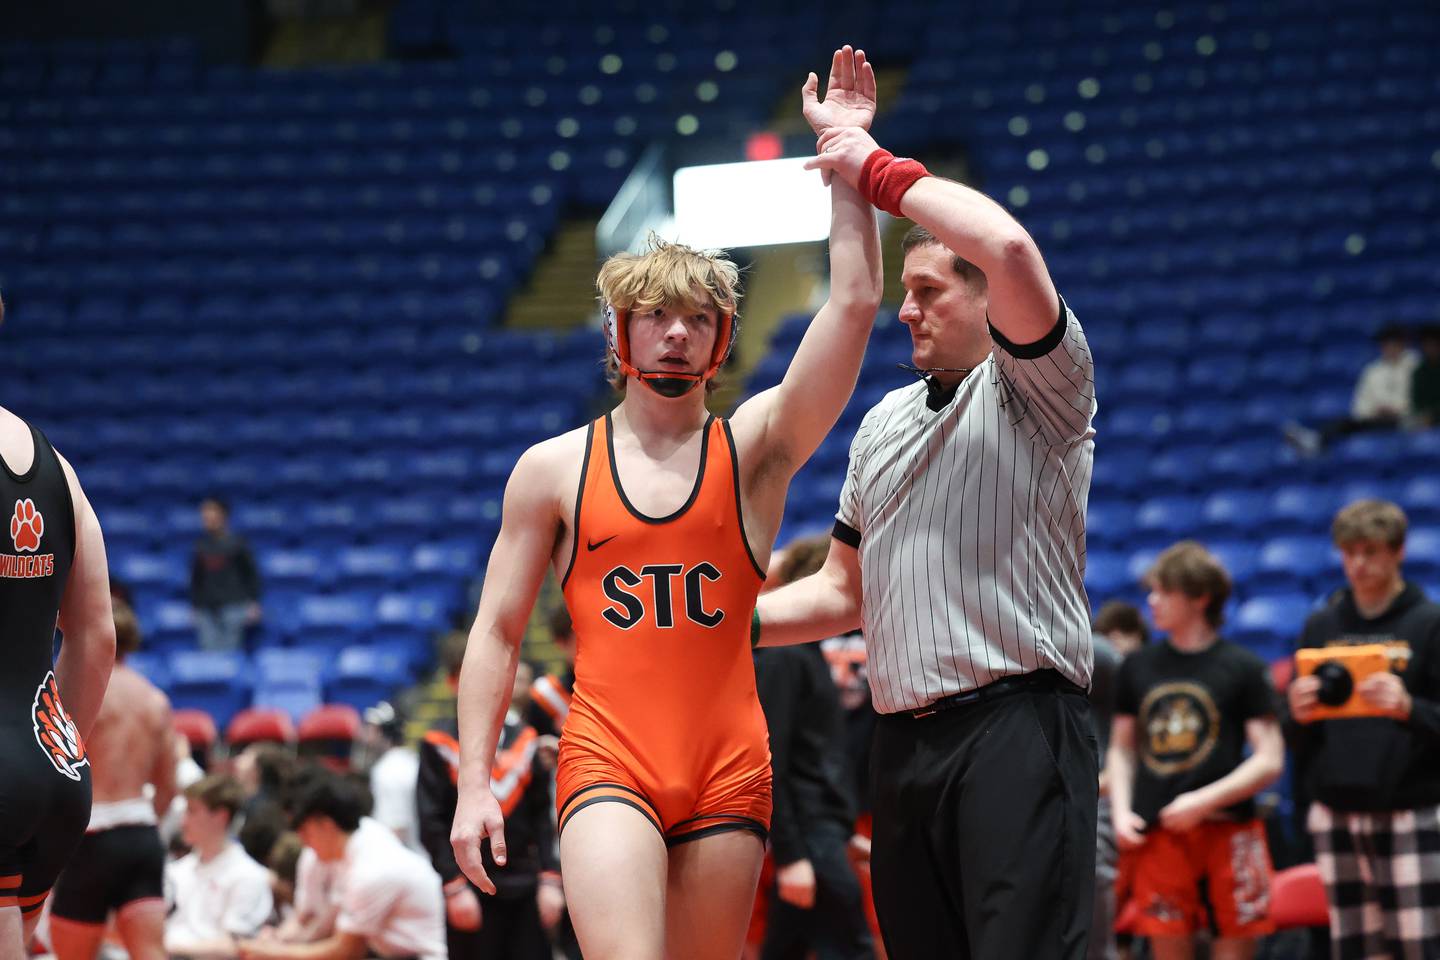 St. Charles East’s Gavin Connolly defeats Libertyville’s James Scanio in the Class 3A 3rd place match on Saturday, Feb. 24th 2024 in Bloomington.